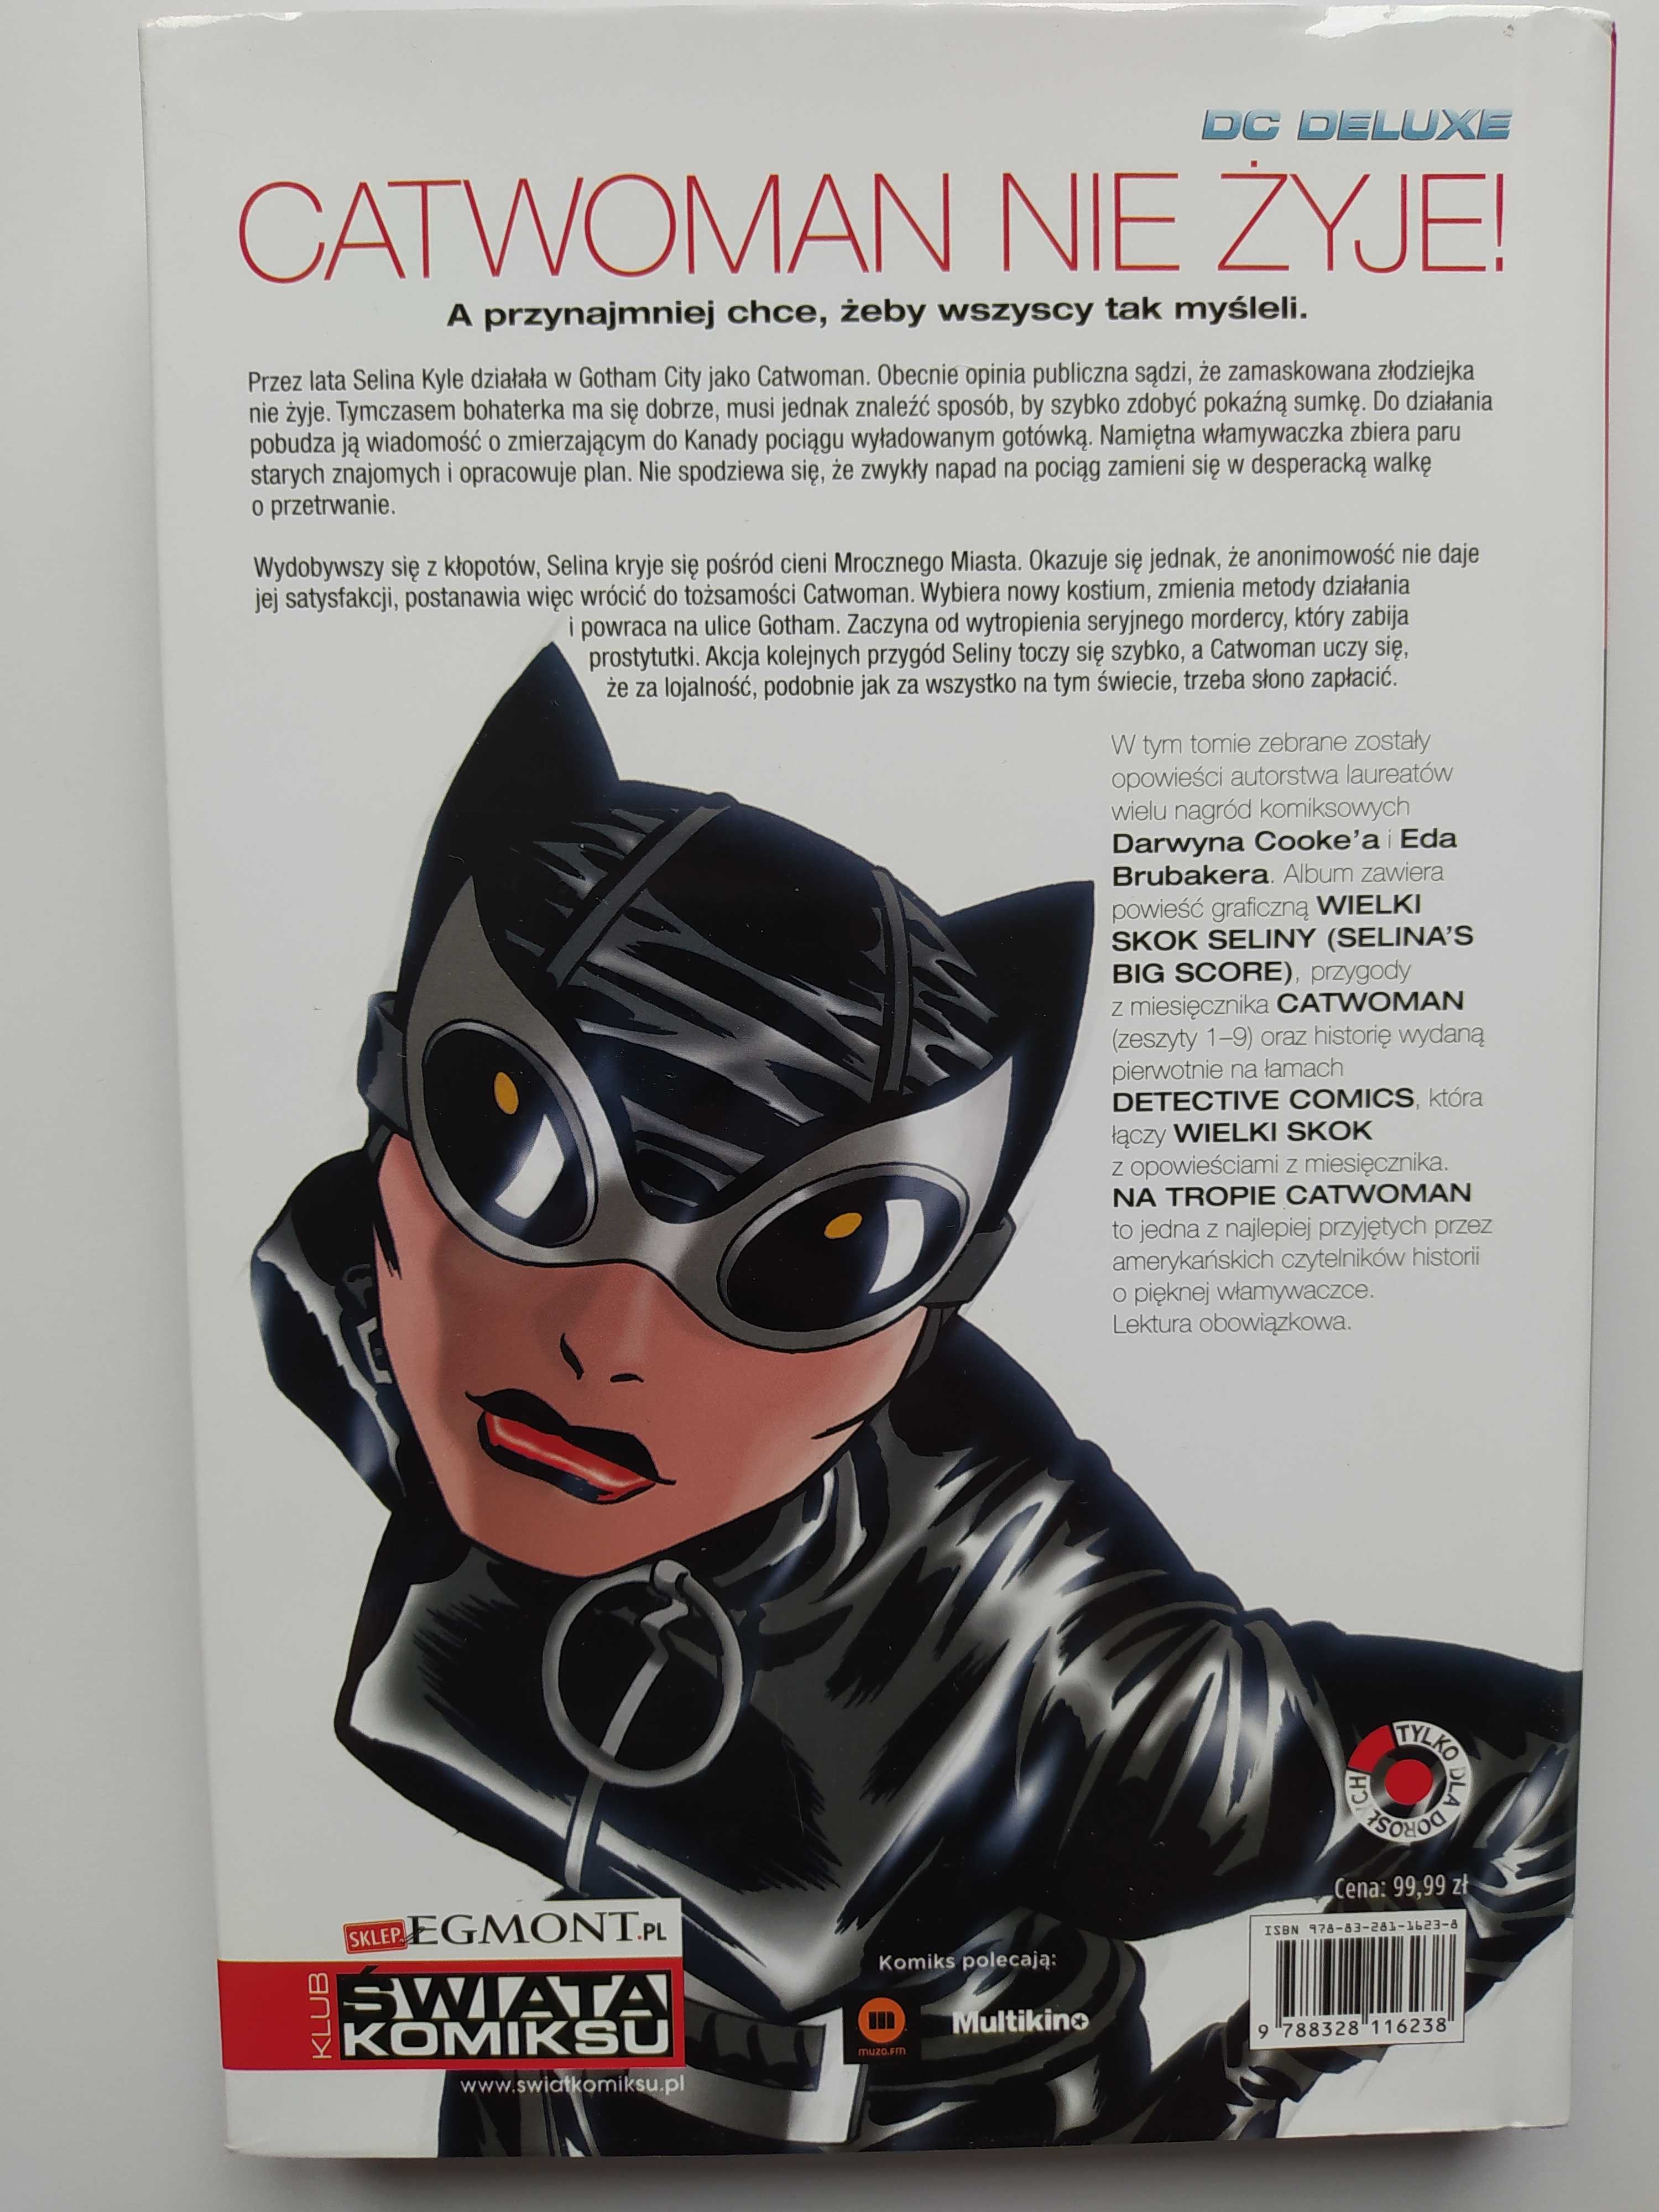 Catwoman: Na tropie Catwoman, tom, 1 DC Deluxe